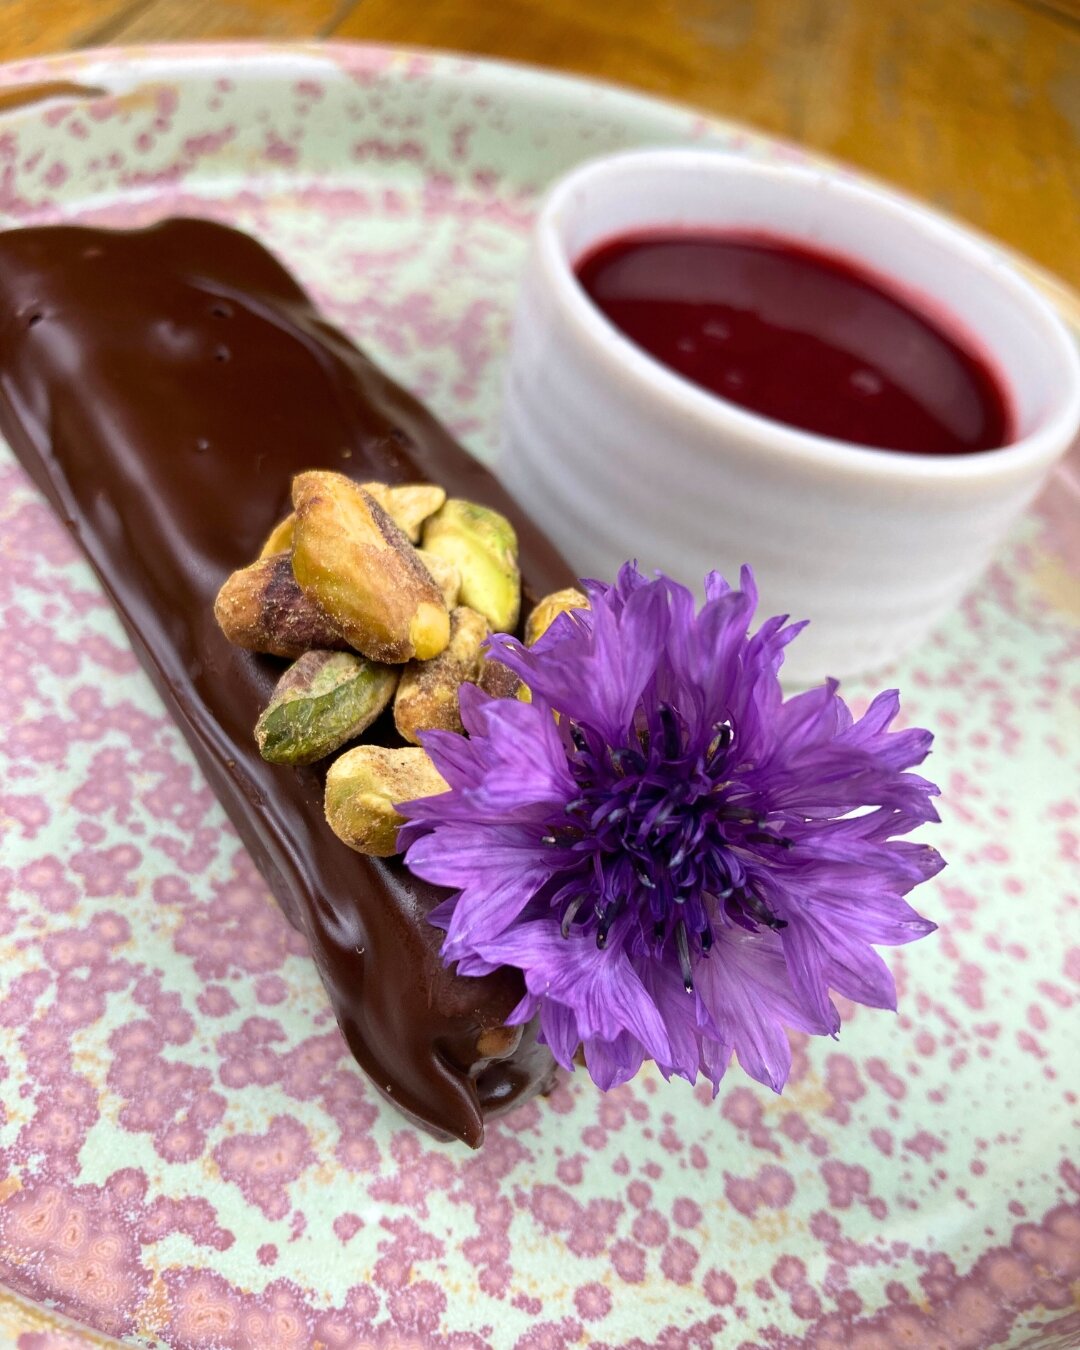 🍫Fruit &amp; nut nougat chocolate bar, apricot &amp; pistachio, raspberry puree (VE)

🍲 Check out our menu and book a table (links in bio)